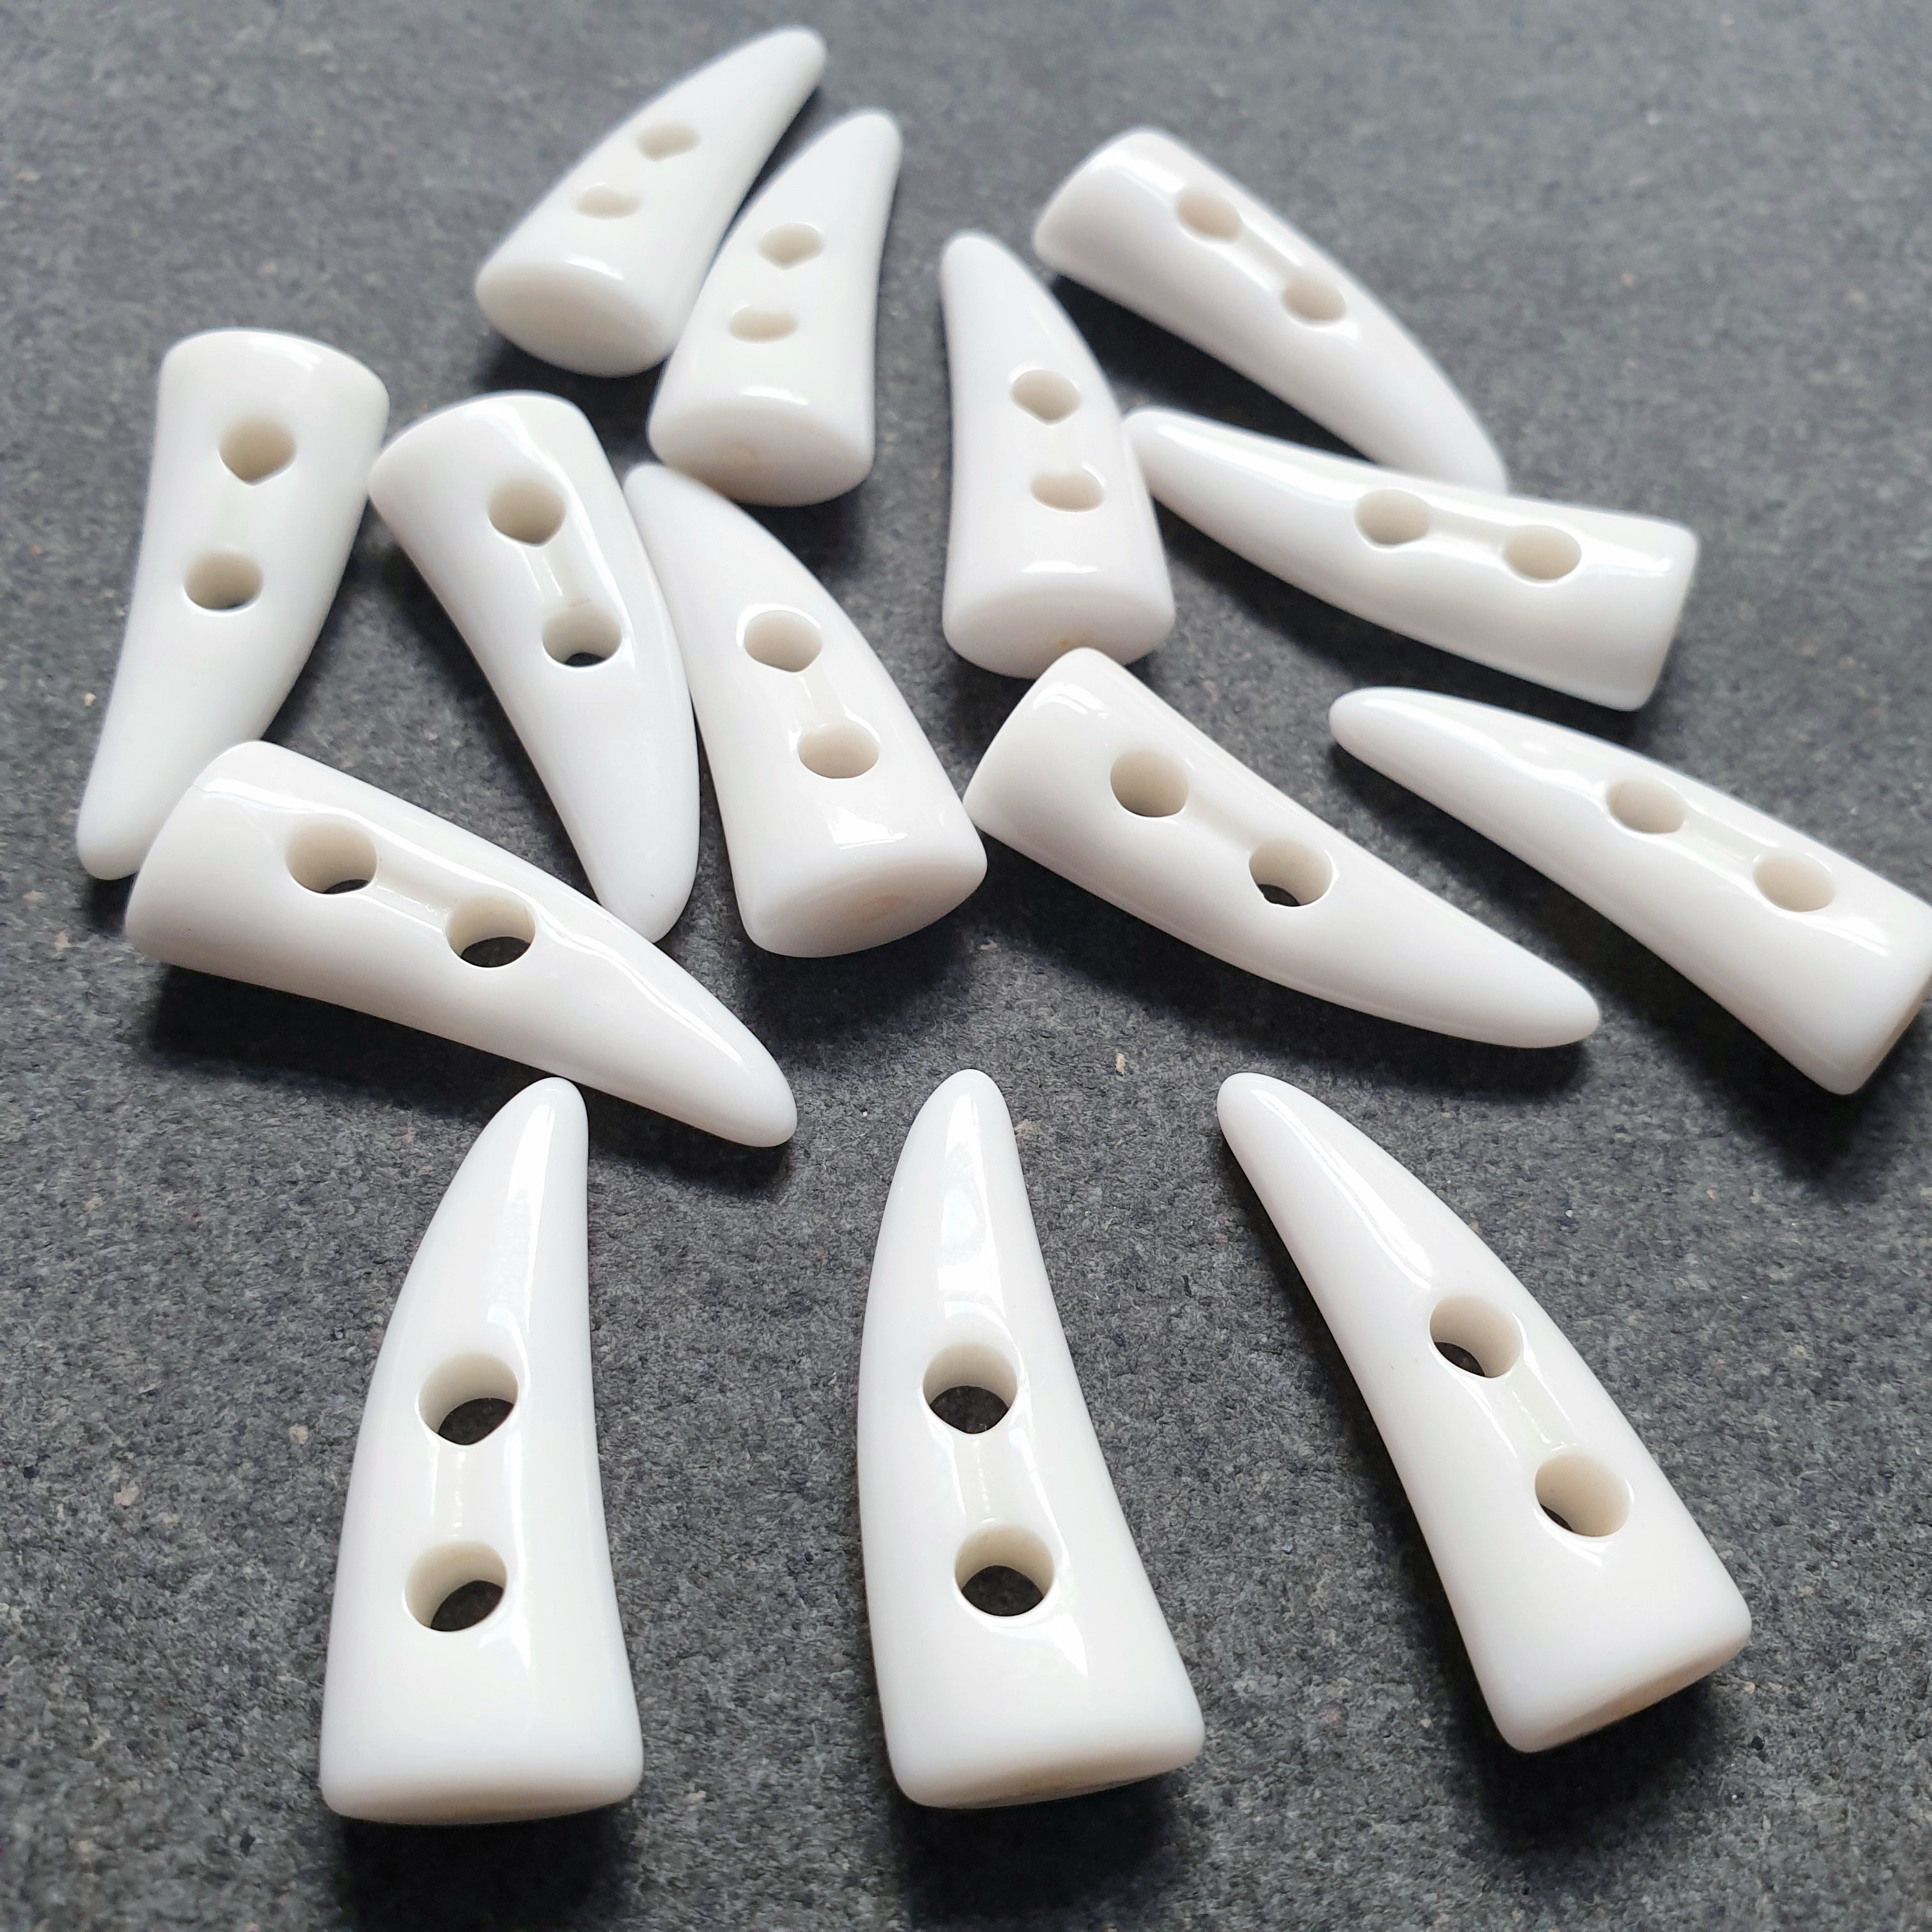 MajorCraft 16pcs 30mm White Horn/Tooth Shaped 2 Holes Sewing Toggle Acrylic Buttons